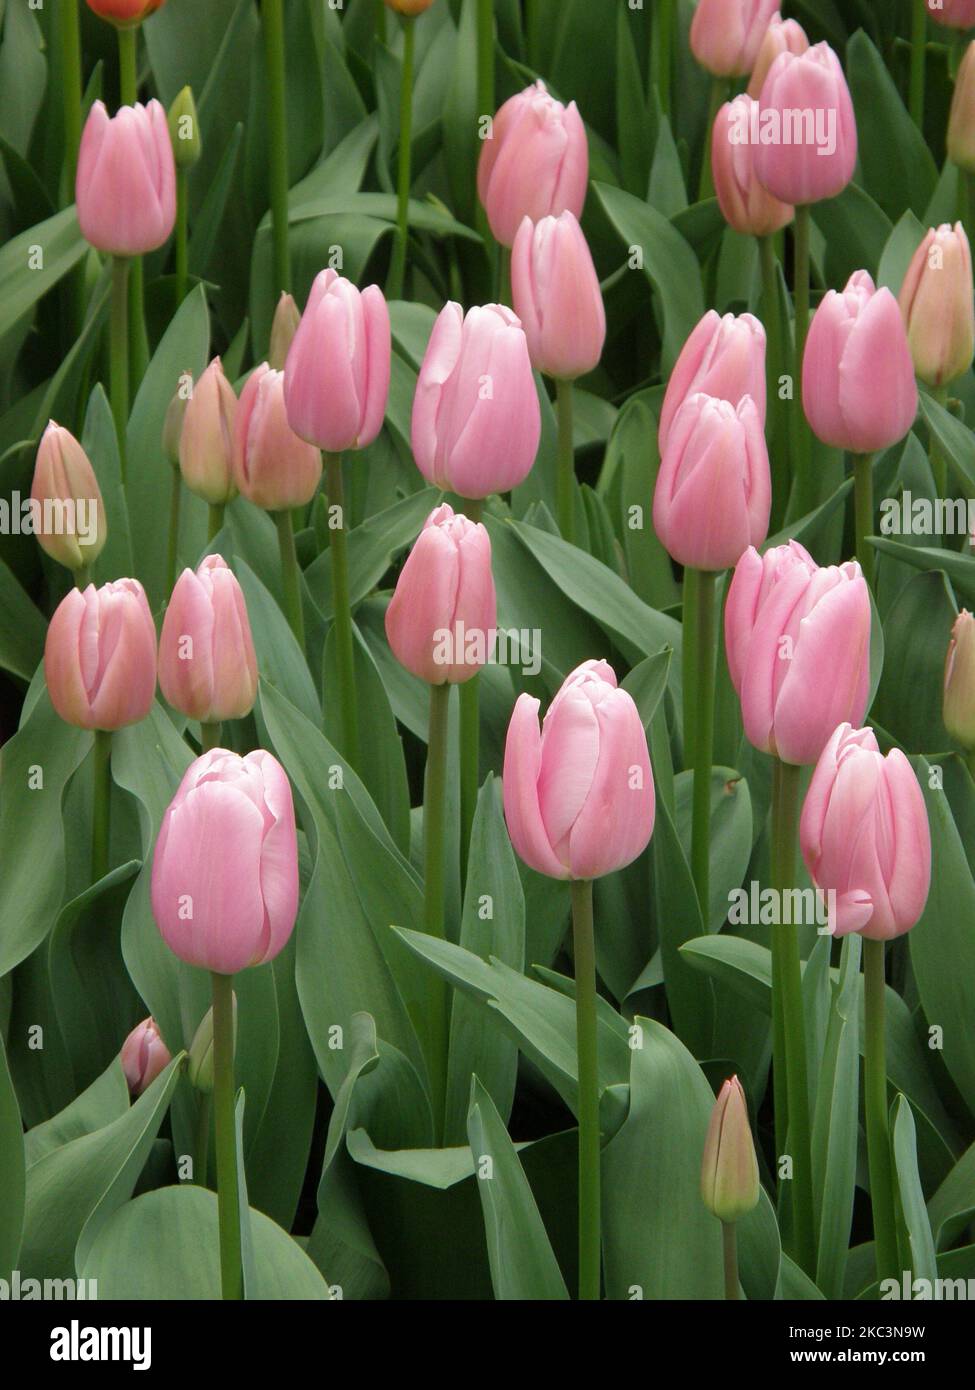 Pink Triumph tulips (Tulipa) Swinging World bloom in a garden in March Stock Photo